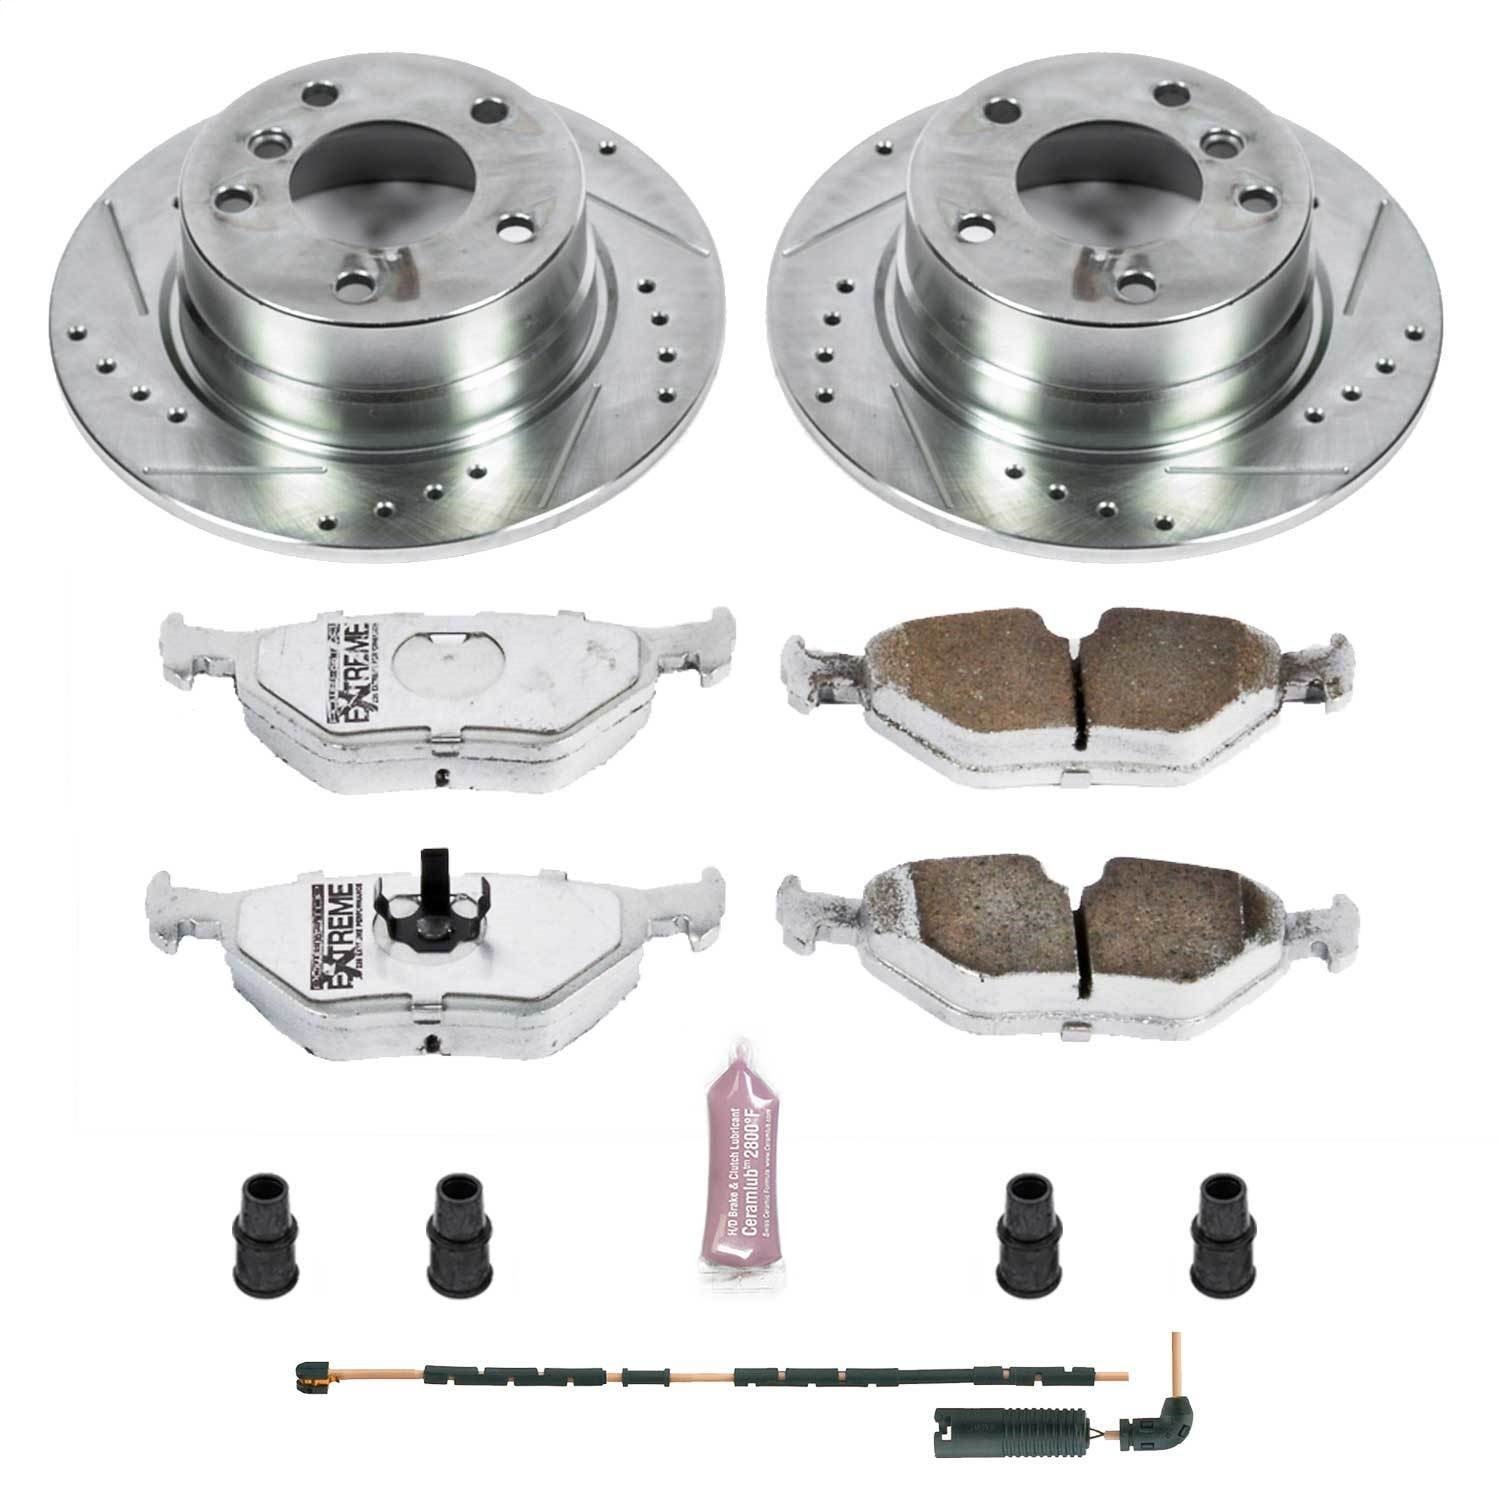 Street Warrior Brake Upgrade Kit Cross-Drilled and Slotted Rotors Z26 Extreme Street Performance Brake Pads Complete Rear Kit